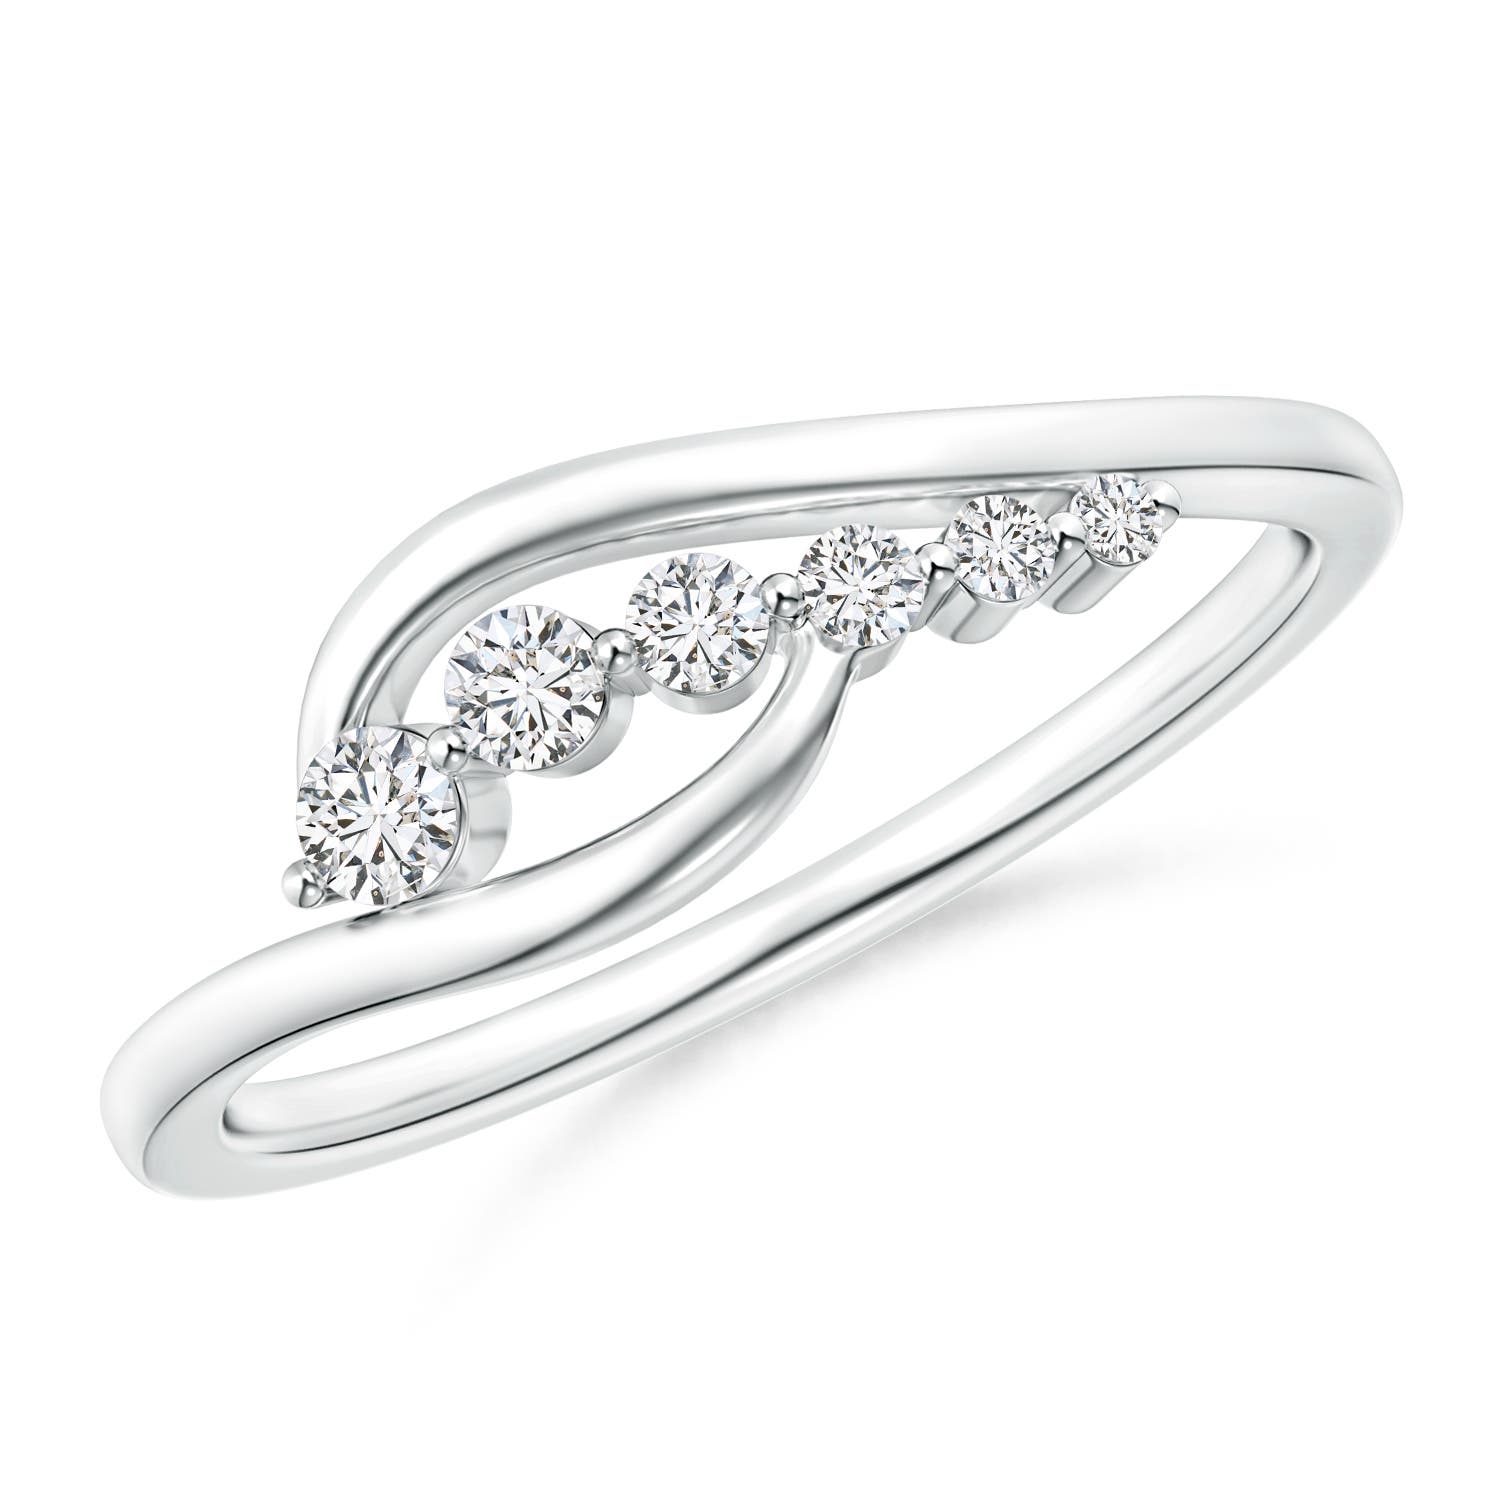 H, SI2 / 0.18 CT / 14 KT White Gold